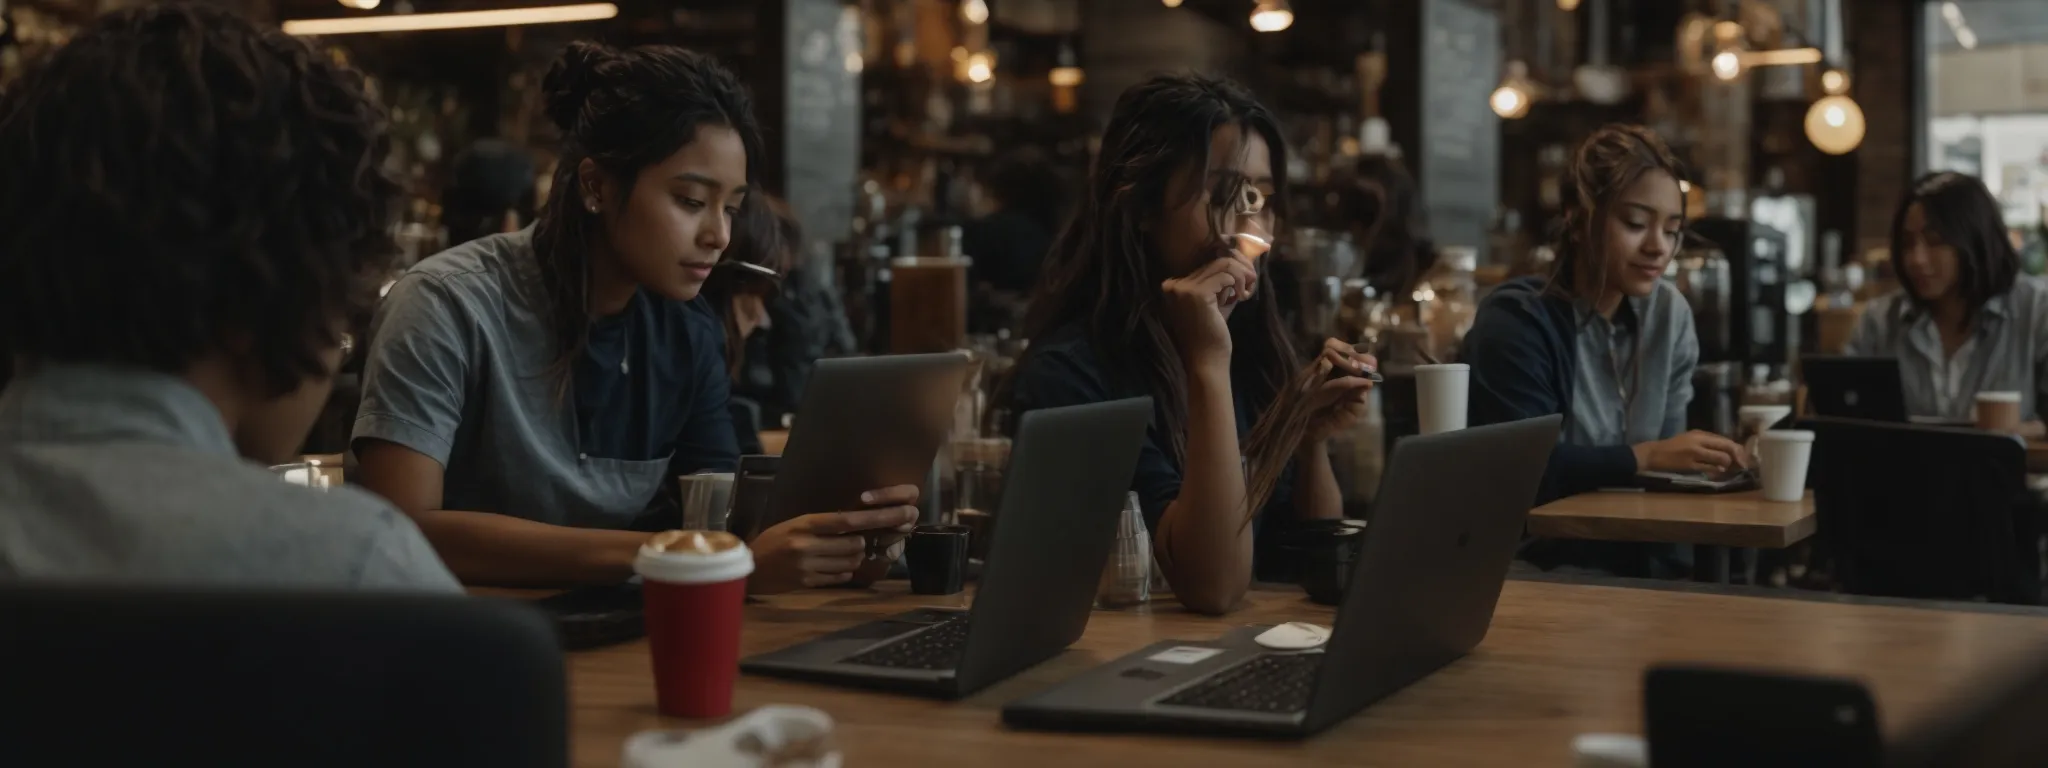 a bustling coffee shop scene where focused individuals work on laptops, implying entrepreneurial activity and digital tool usage.